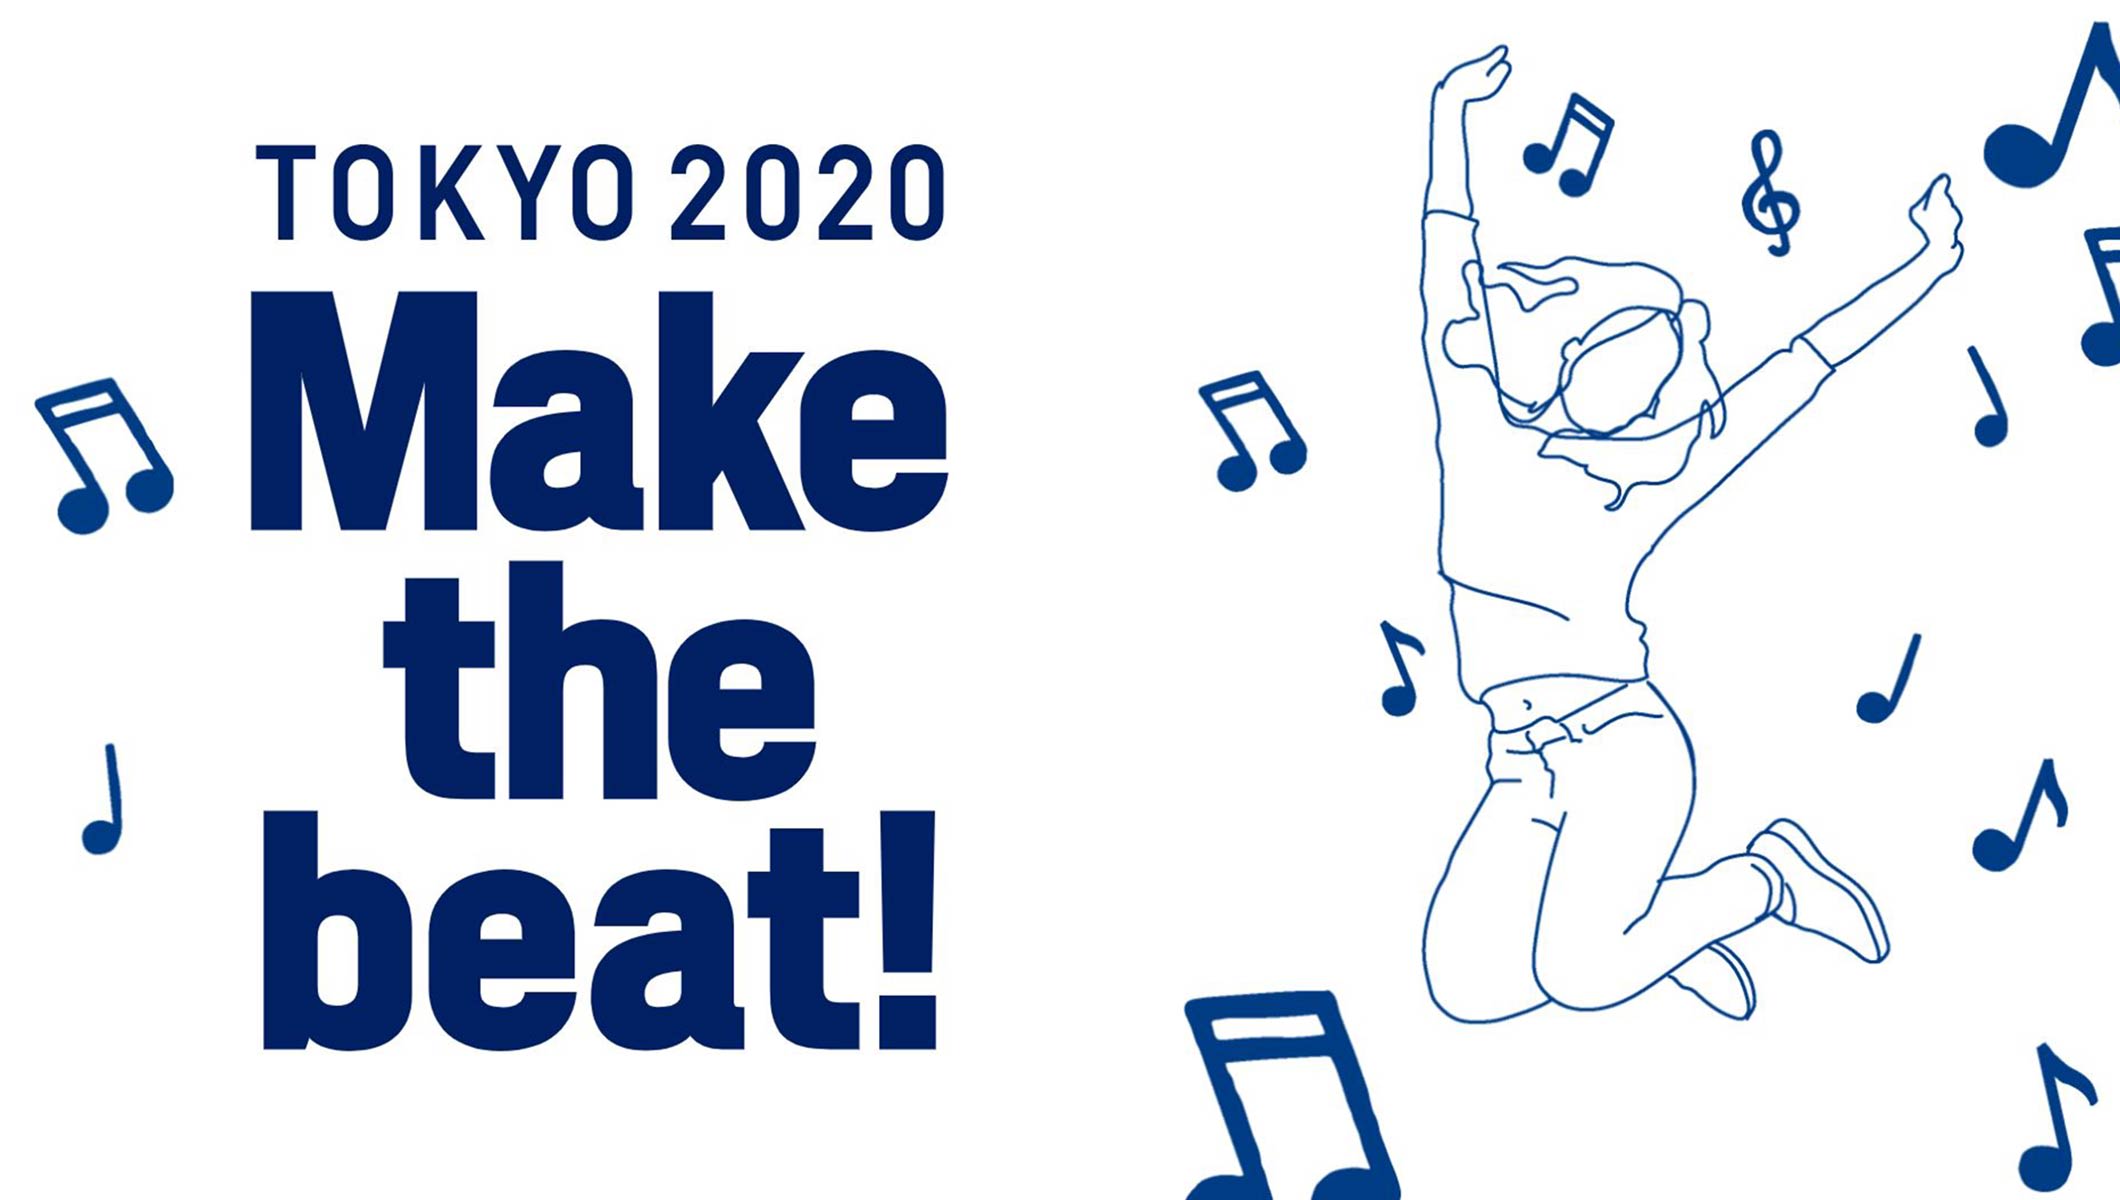 Intel technology set to deliver several innovations during Tokyo 2020